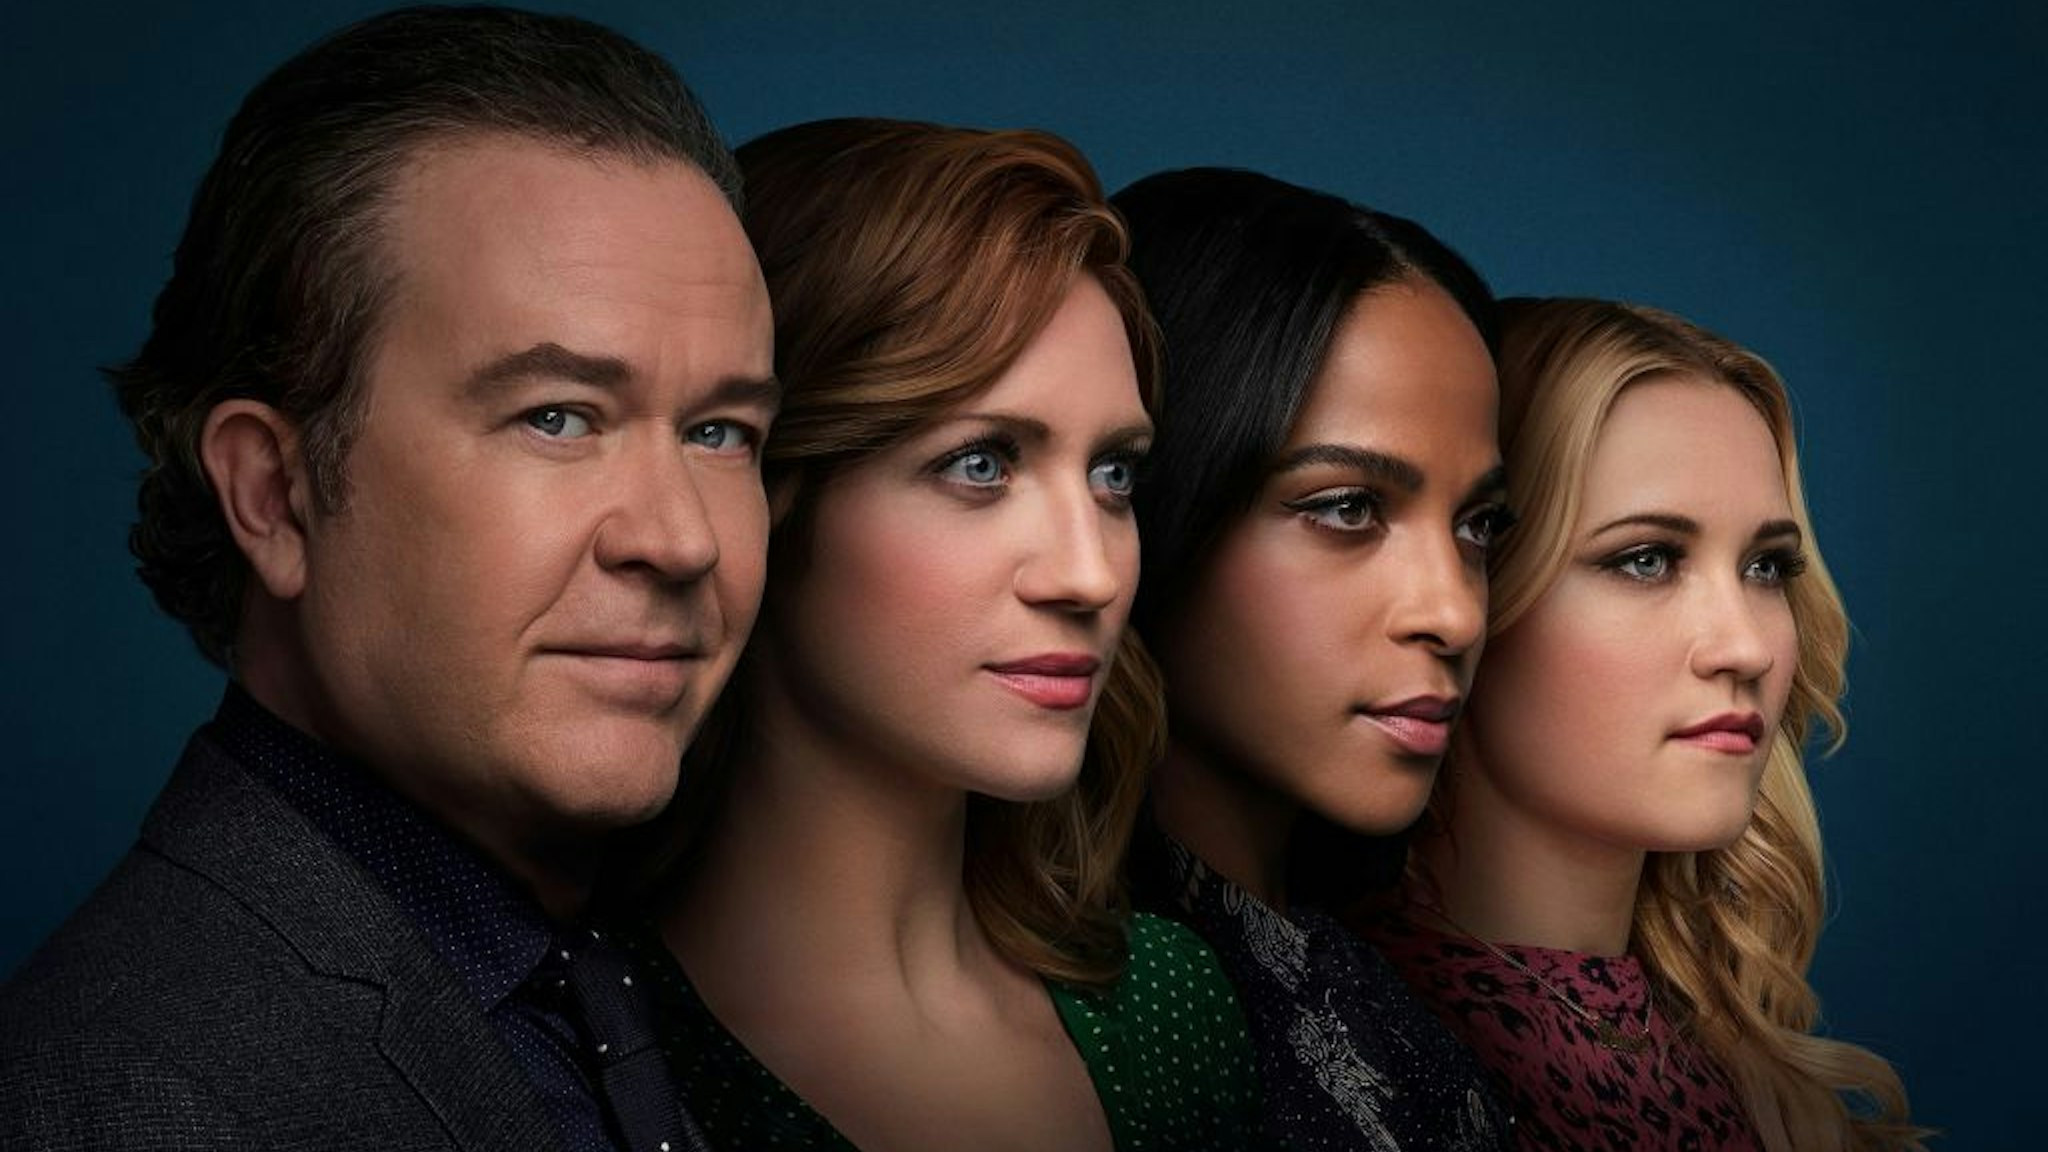 L-R: Timothy Hutton as Dr. Leon Bechley, Brittany Snow as Julia Bechley, Megalyn Echikunwoke as Edie Palmer and Emily Osment as Roxy Doyle in Season 1 of ALMOST FAMILY premiering Wednesday, October 2 (9:00-10:00pm PM ET/PT) on FOX. (Photo by FOX via Getty Images)